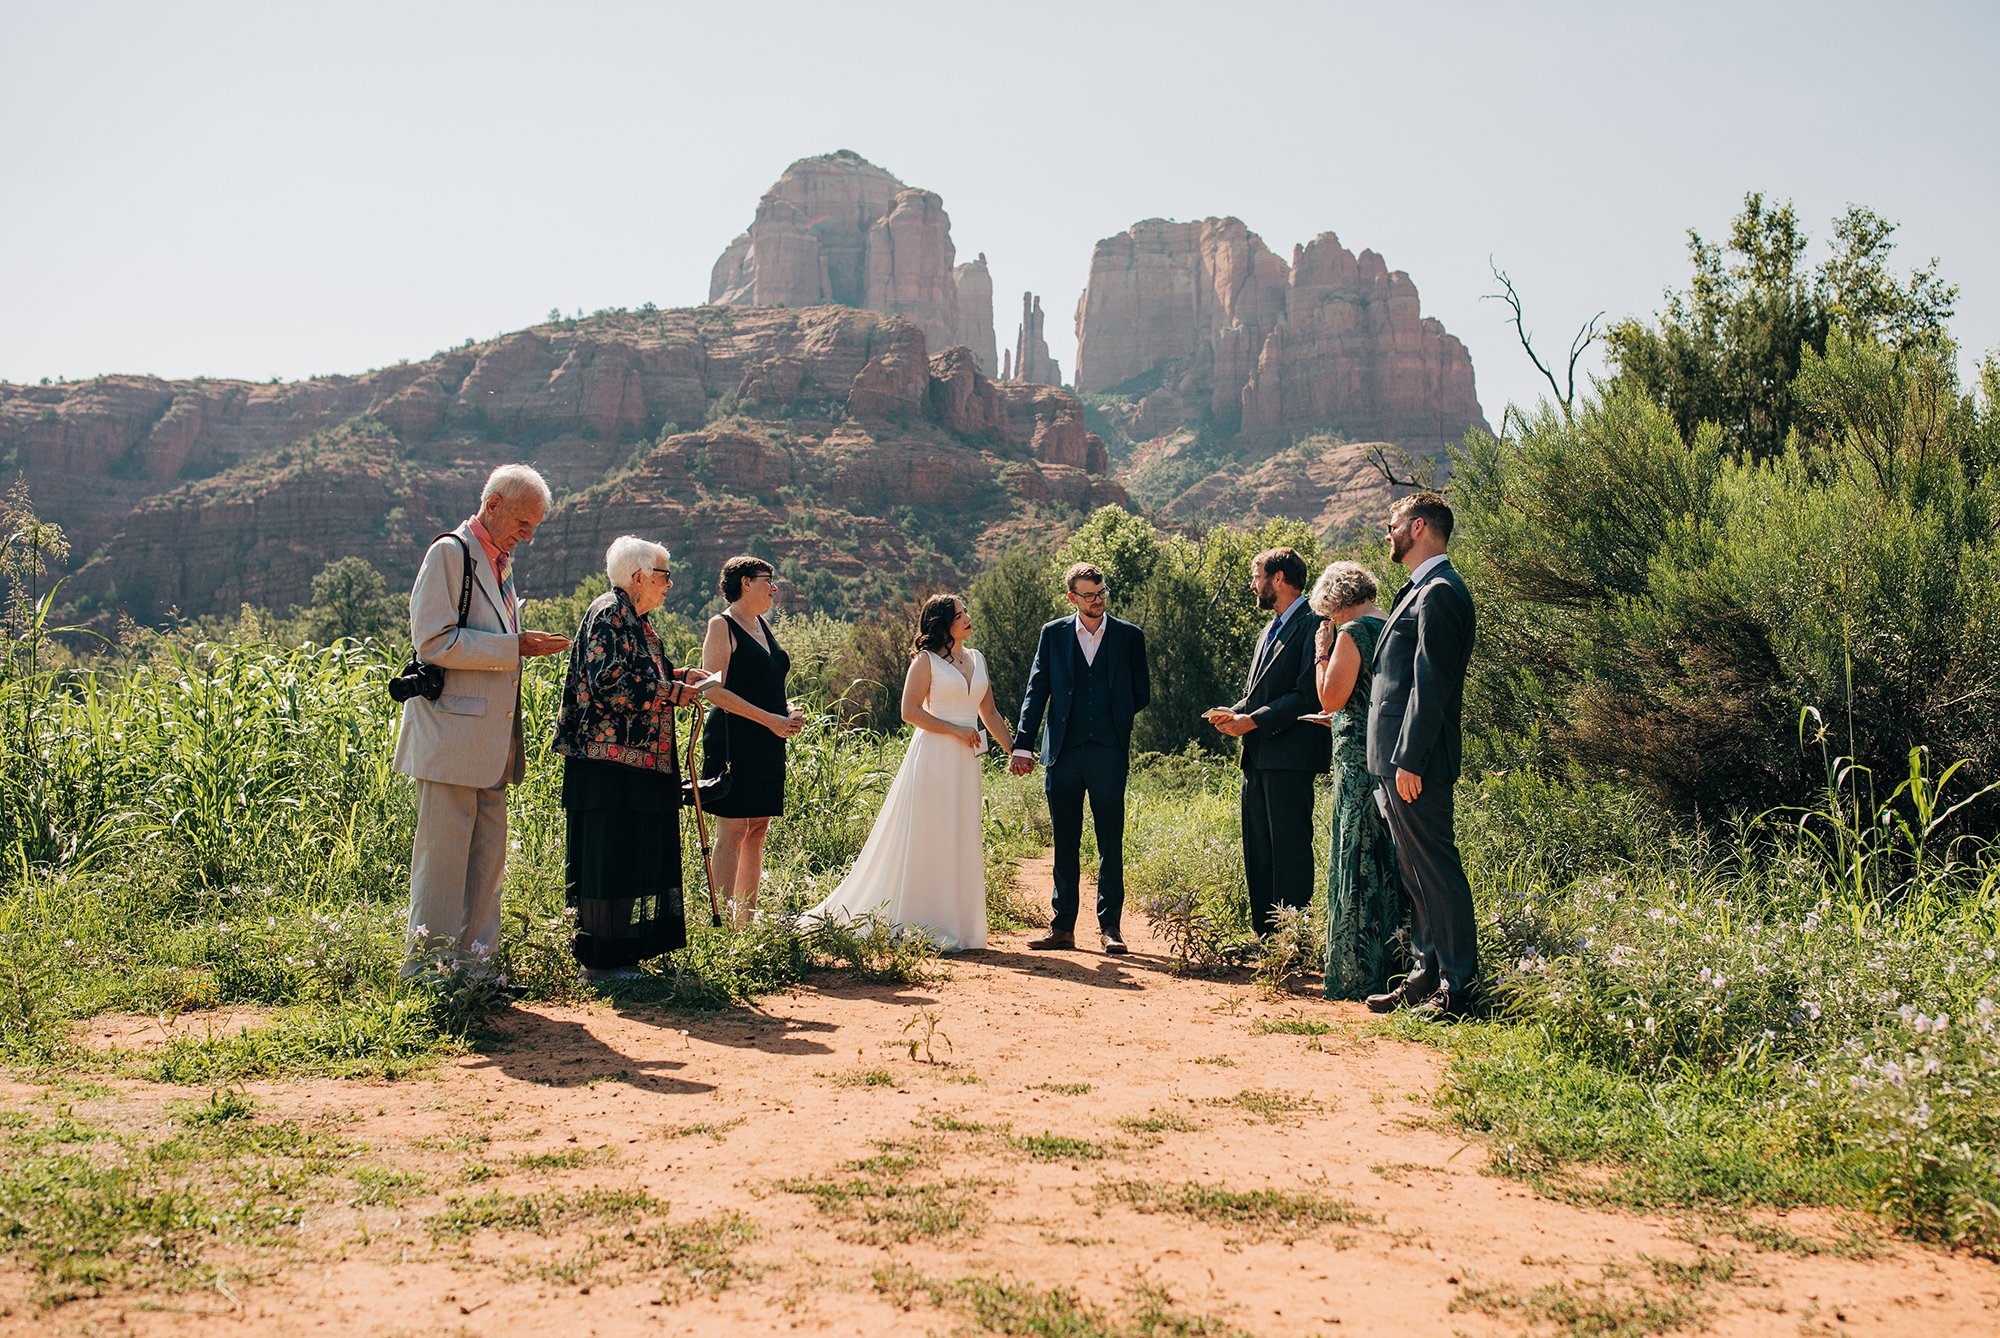 Supported by their families, Stephanie and Matthew get married in Sedona Arizona